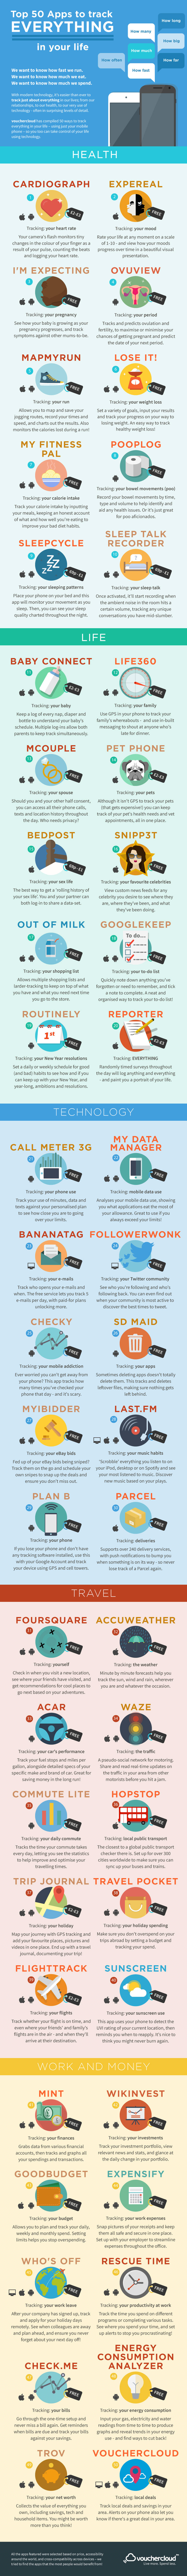 50 Apps To Optimize Life Infographic